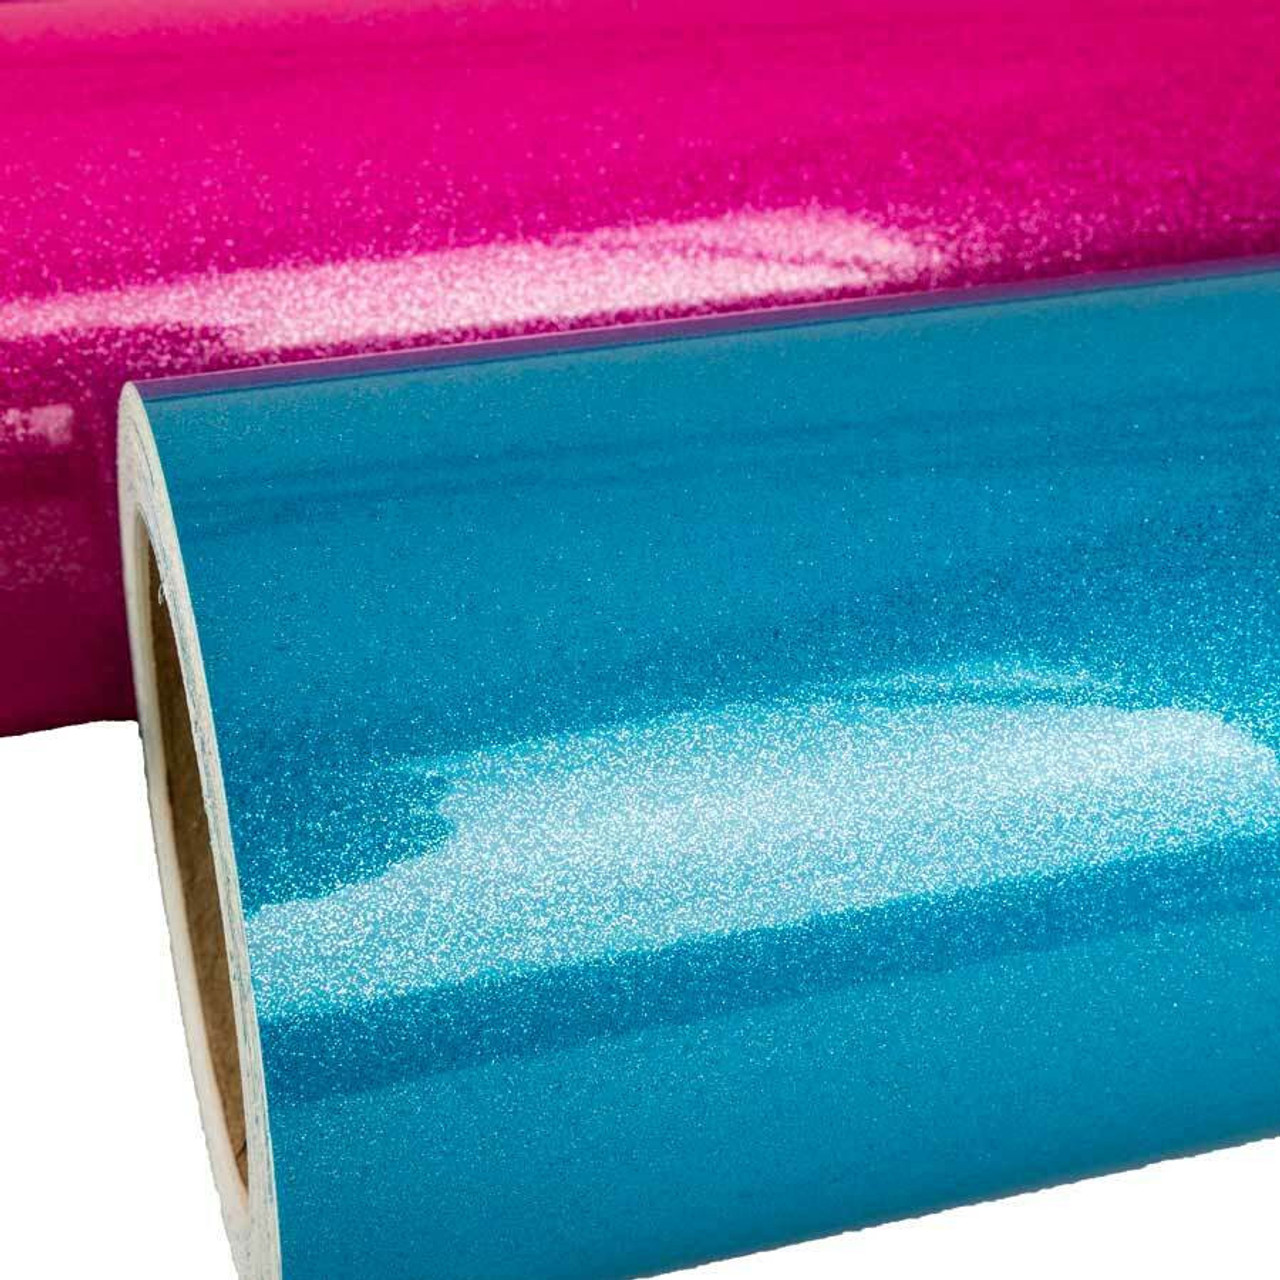 StyleTech Ultra Metallic Glitter Adhesive Vinyl 12 Wide By-The-Foot